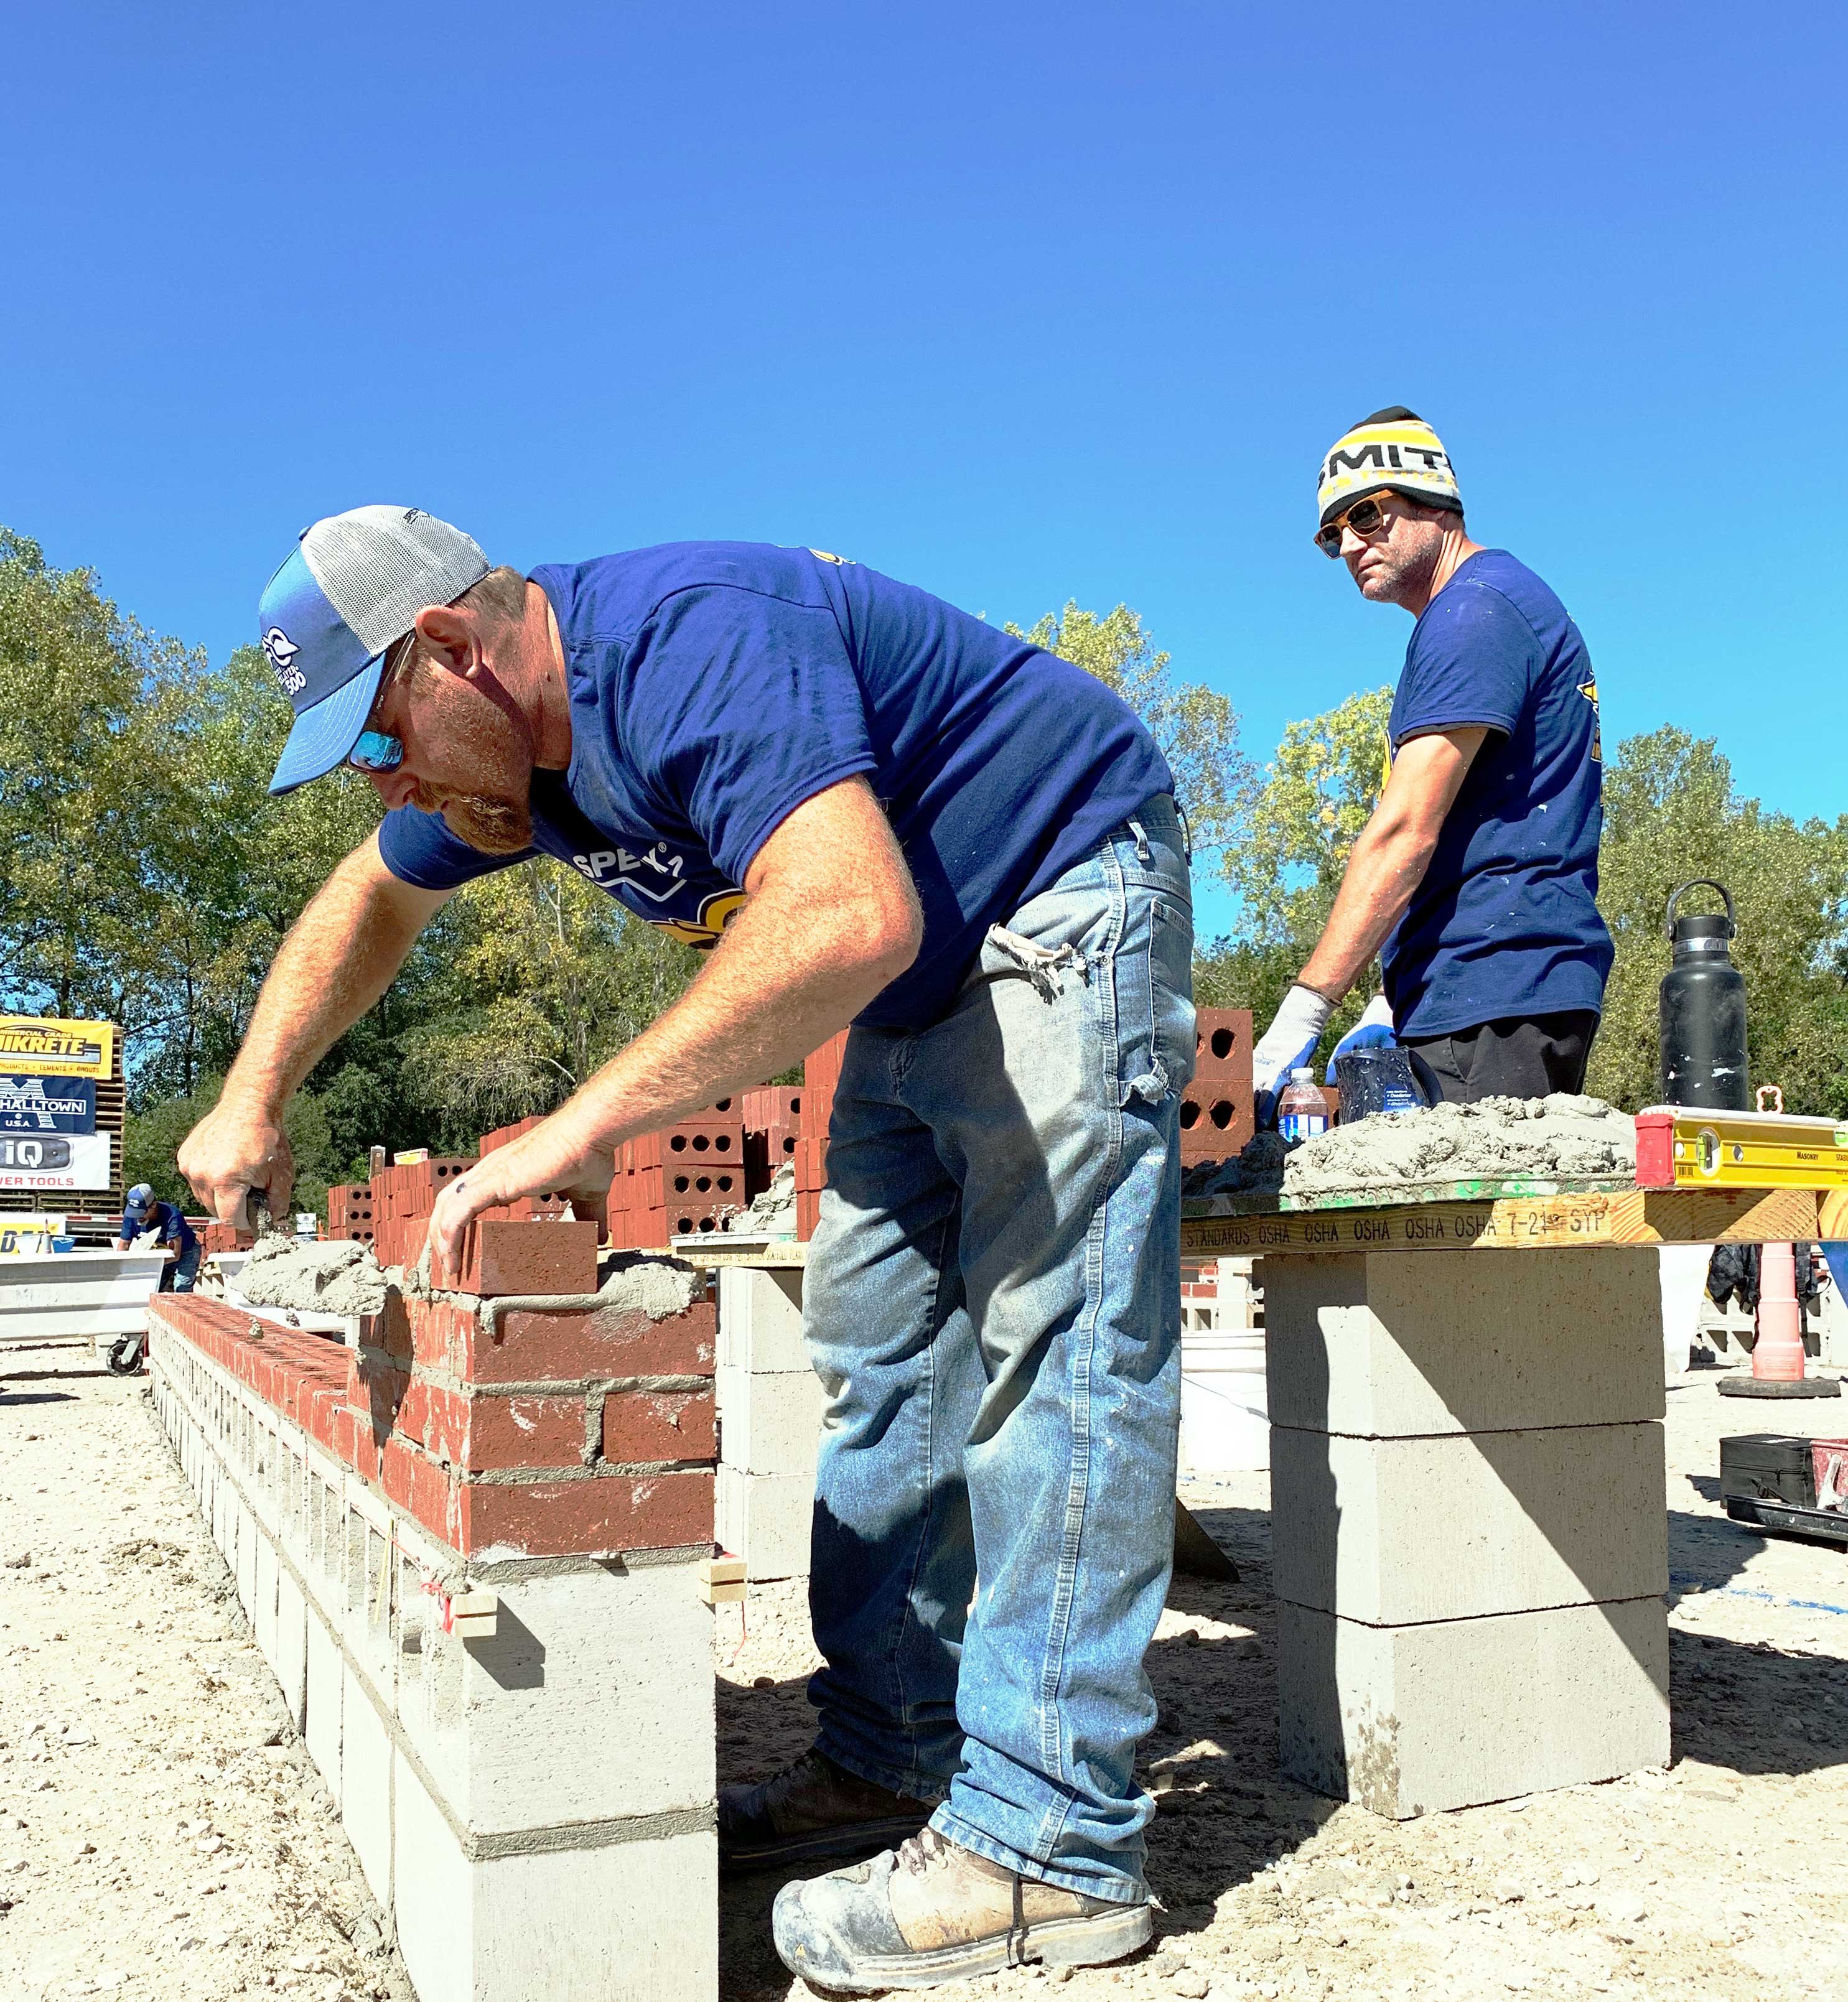 Two C.D. Smith Masonry Construction Teams competed in the 2021 SPEC MIX BRICKLAYER 500 Regional Series at Fond du Lac Stone 